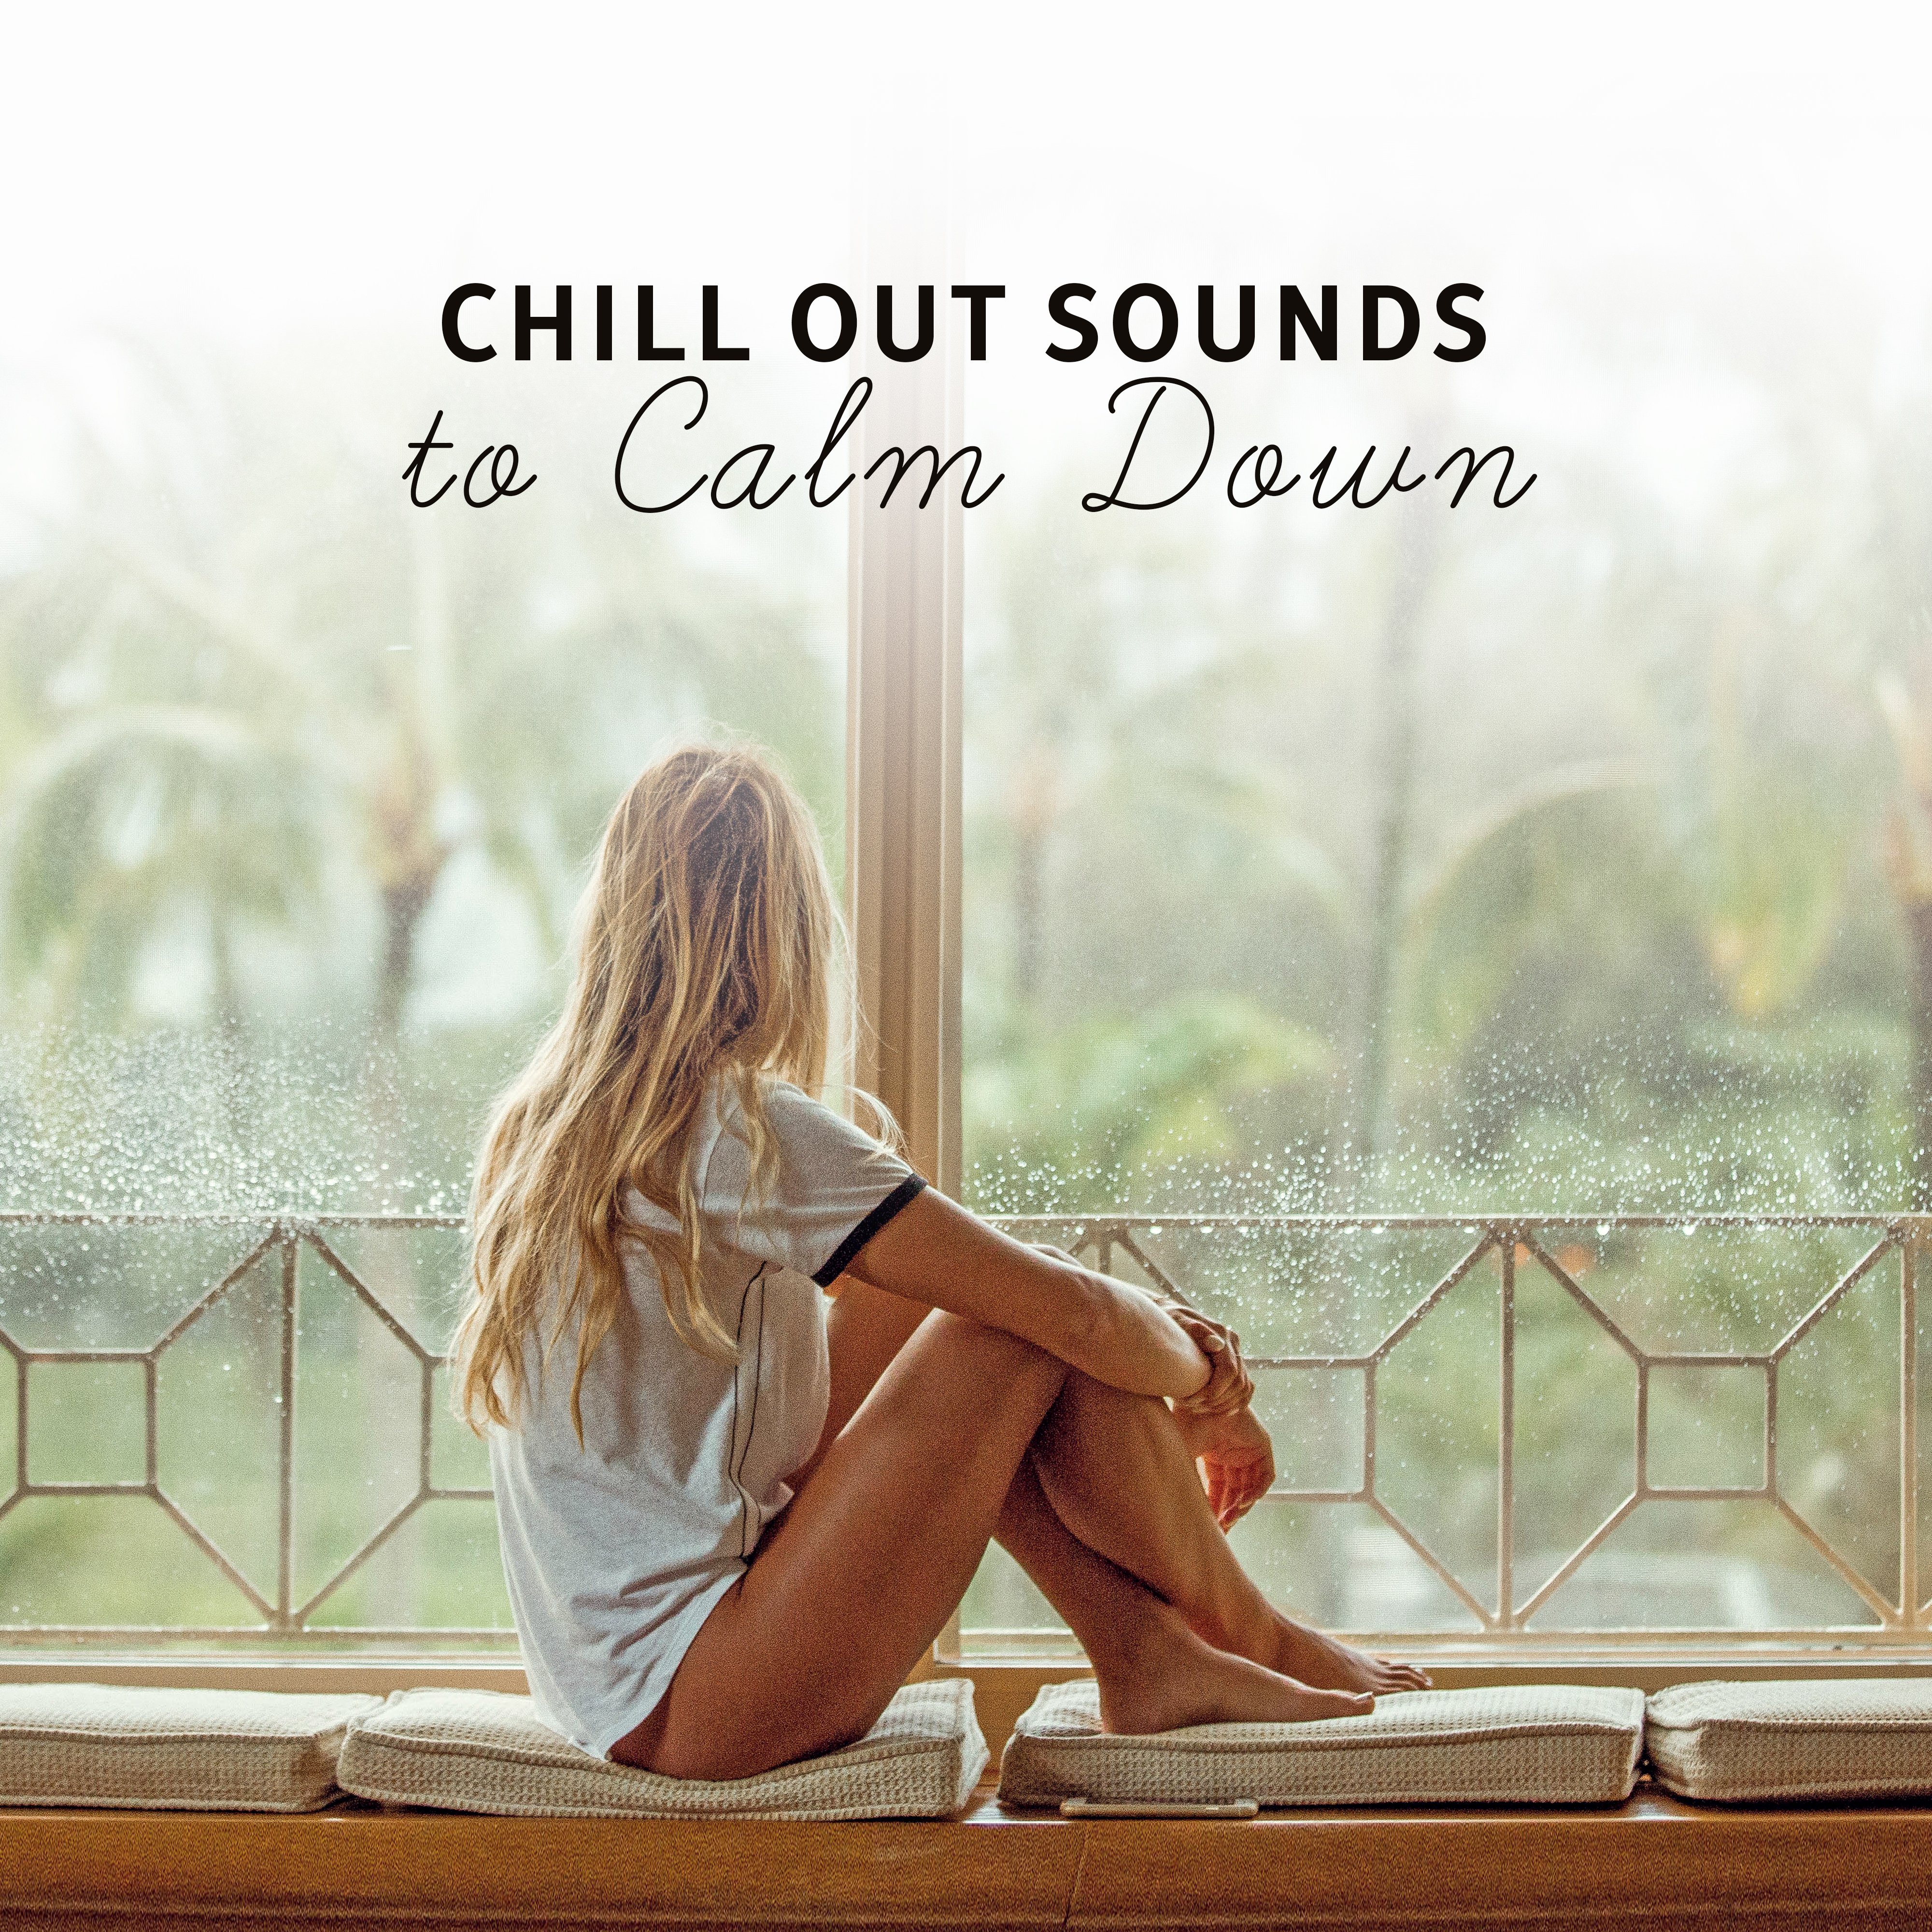 Chill Out Sounds to Calm Down – Relaxing Chill Out Music, Beach Lounge, Summer Sun, Holiday Relaxation